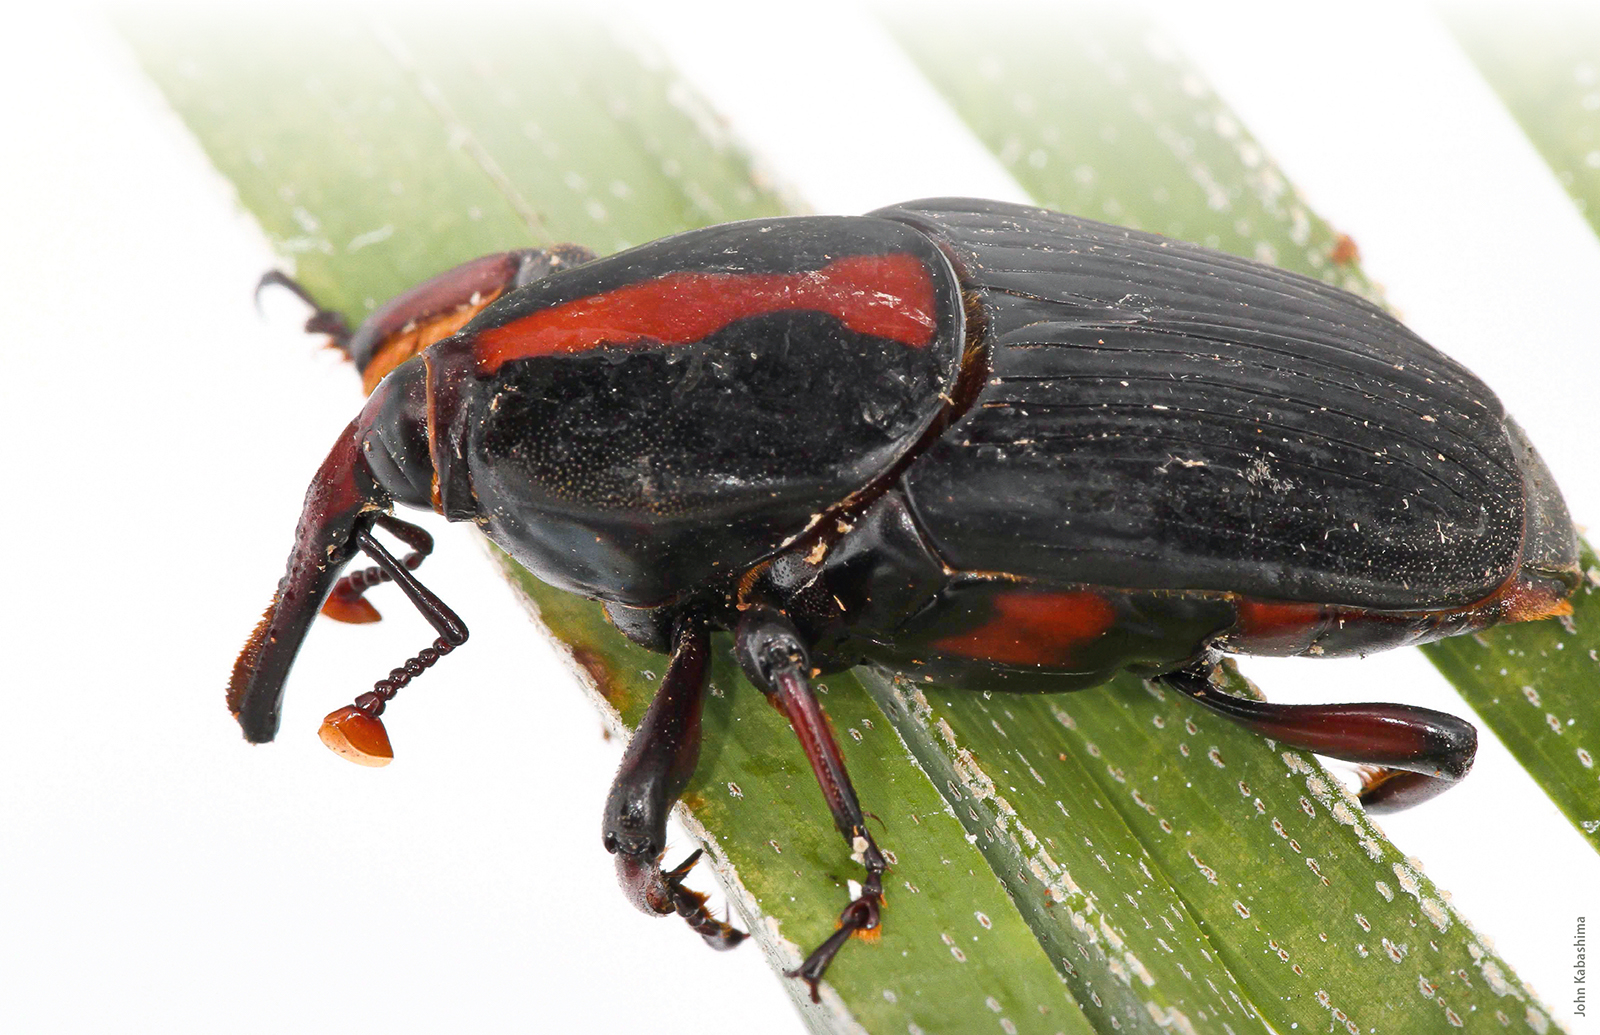 Adult male Rhynchophorus vulneratus recovered from an infested Canary Island date palm in Laguna Beach.